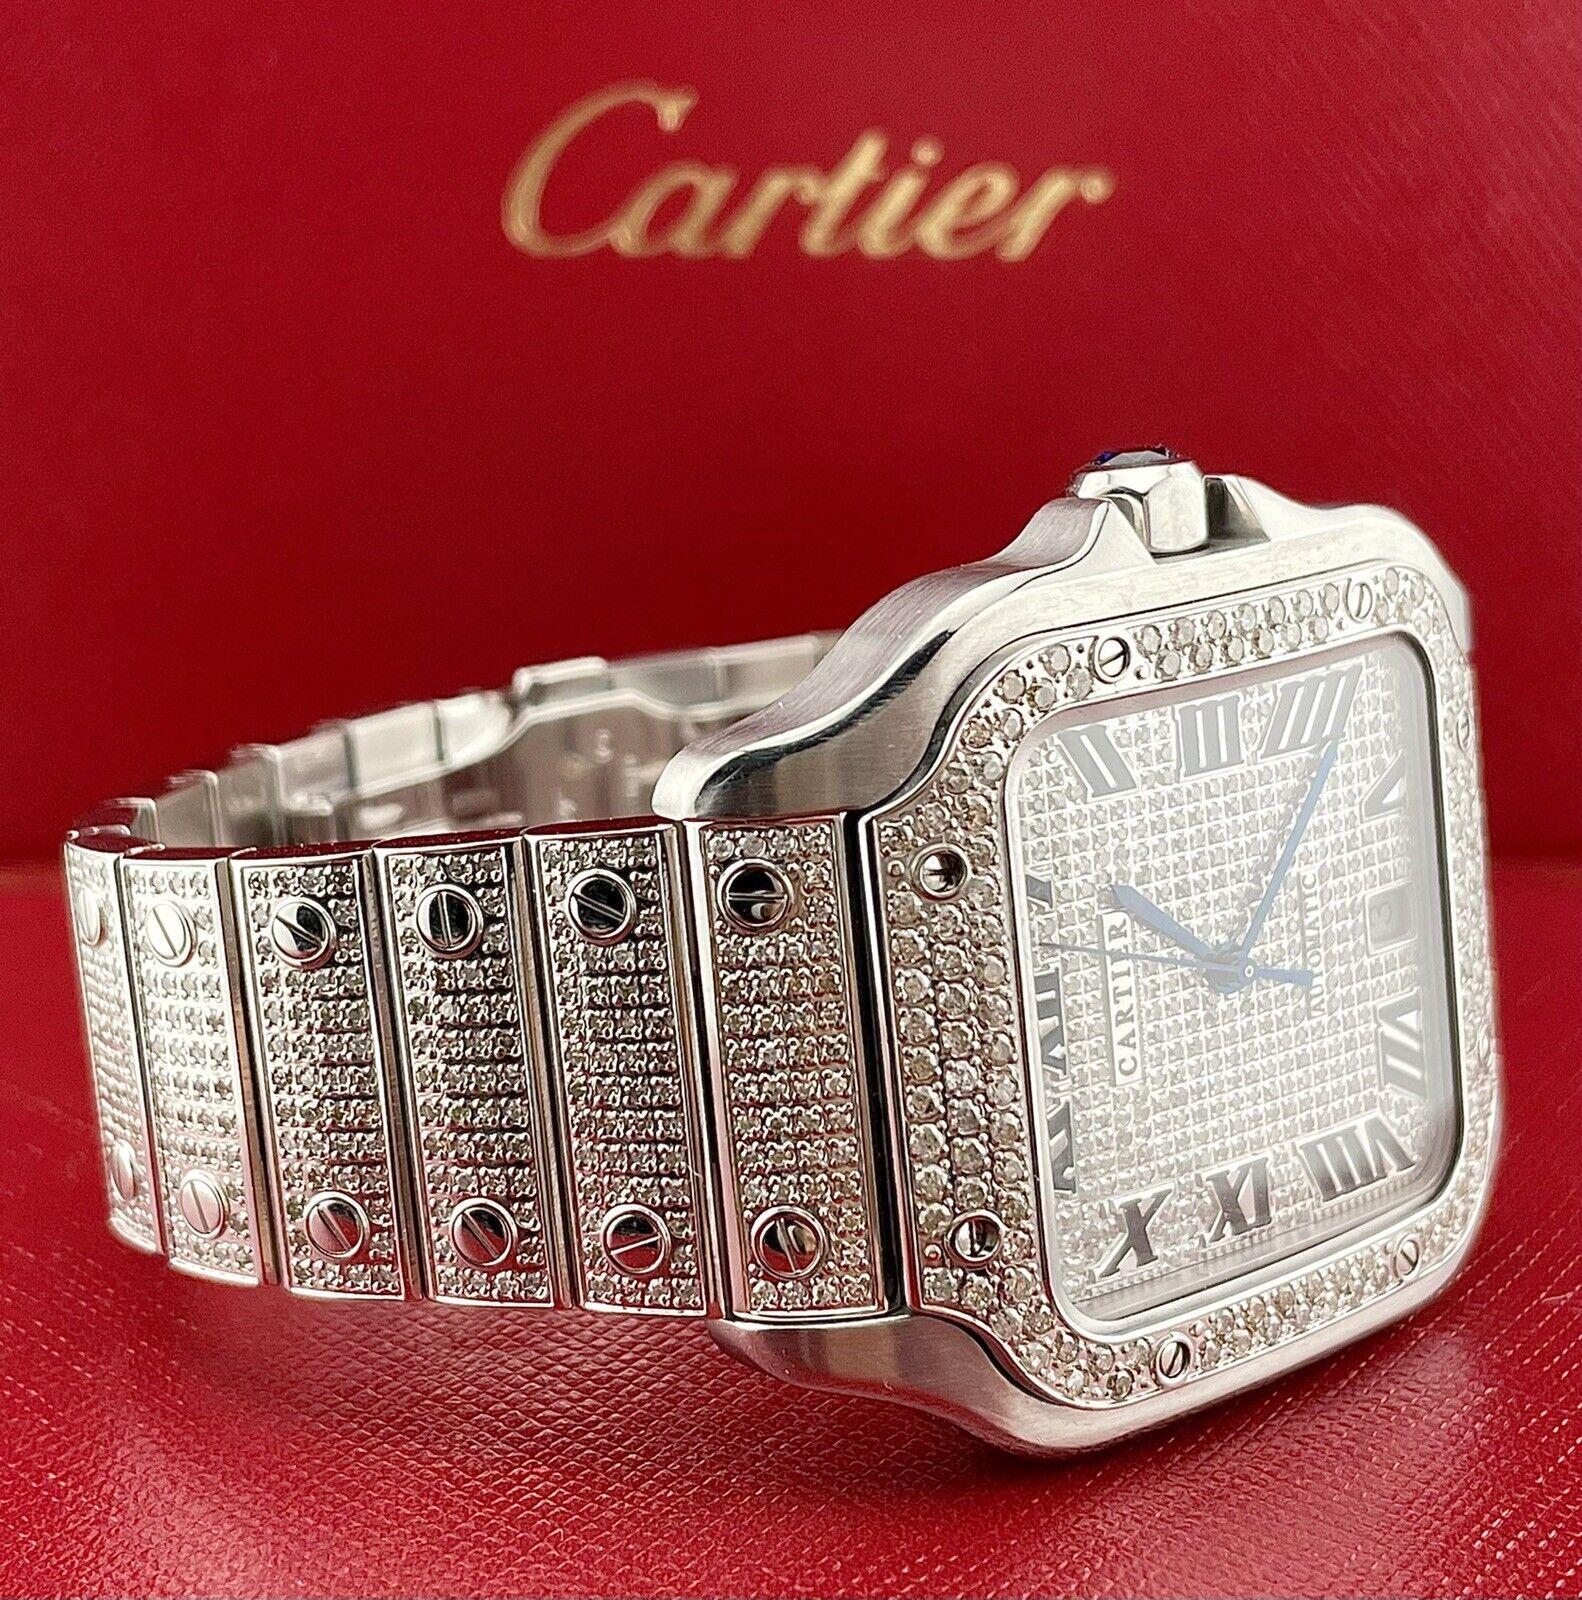 Cartier Santos 40mm Watch. A Pre-owned watch w/ Gift box. Watch is 100% Authentic and Comes with Authenticity Card. Watch Reference is WSSA0018 and is in Excellent Condition (See Pictures). The Dial color is Black and Silver, and the Material is